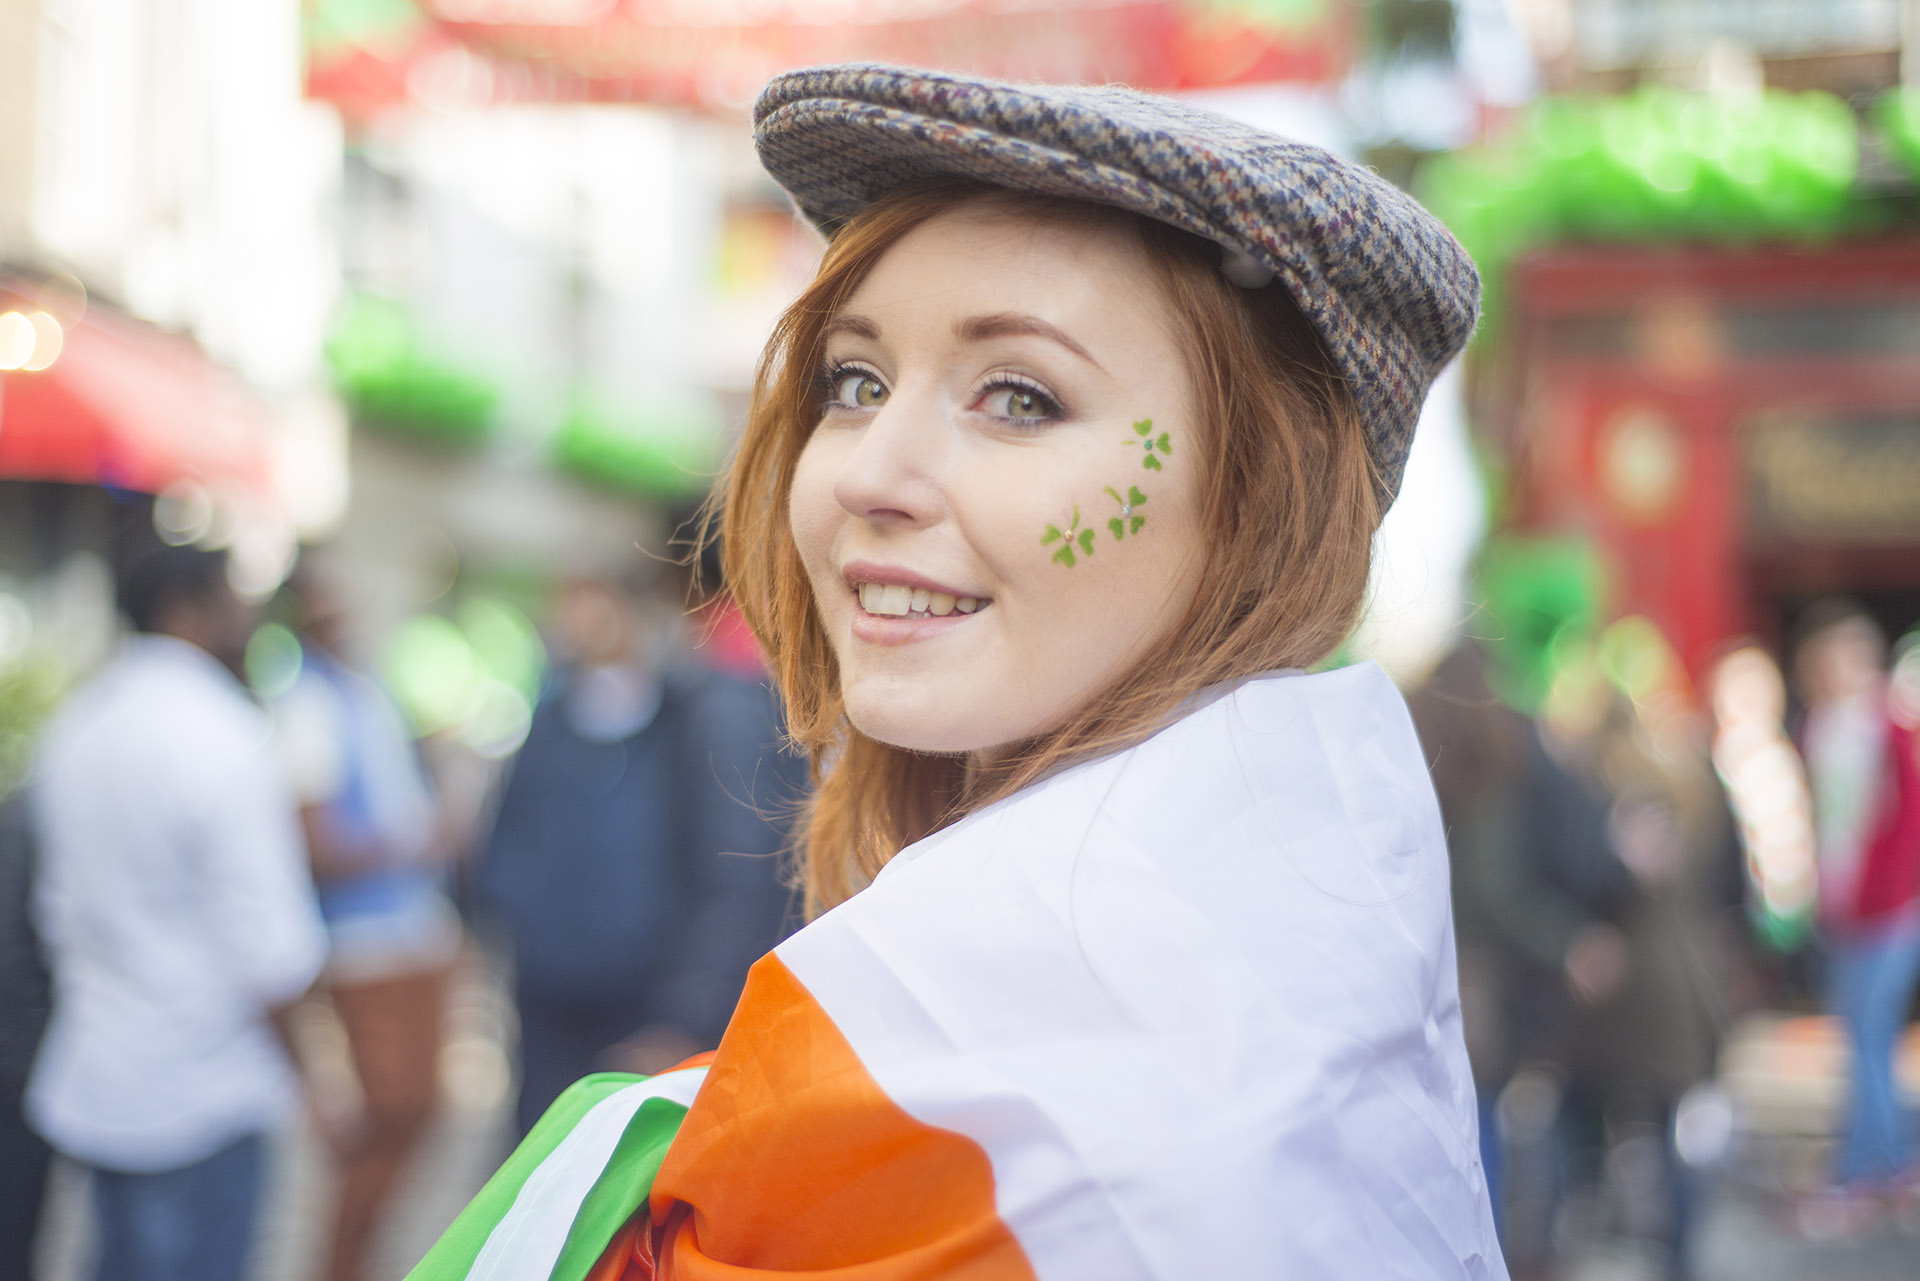 Top 3 Fun Facts about St. Patrick’s Day to Share with your Students